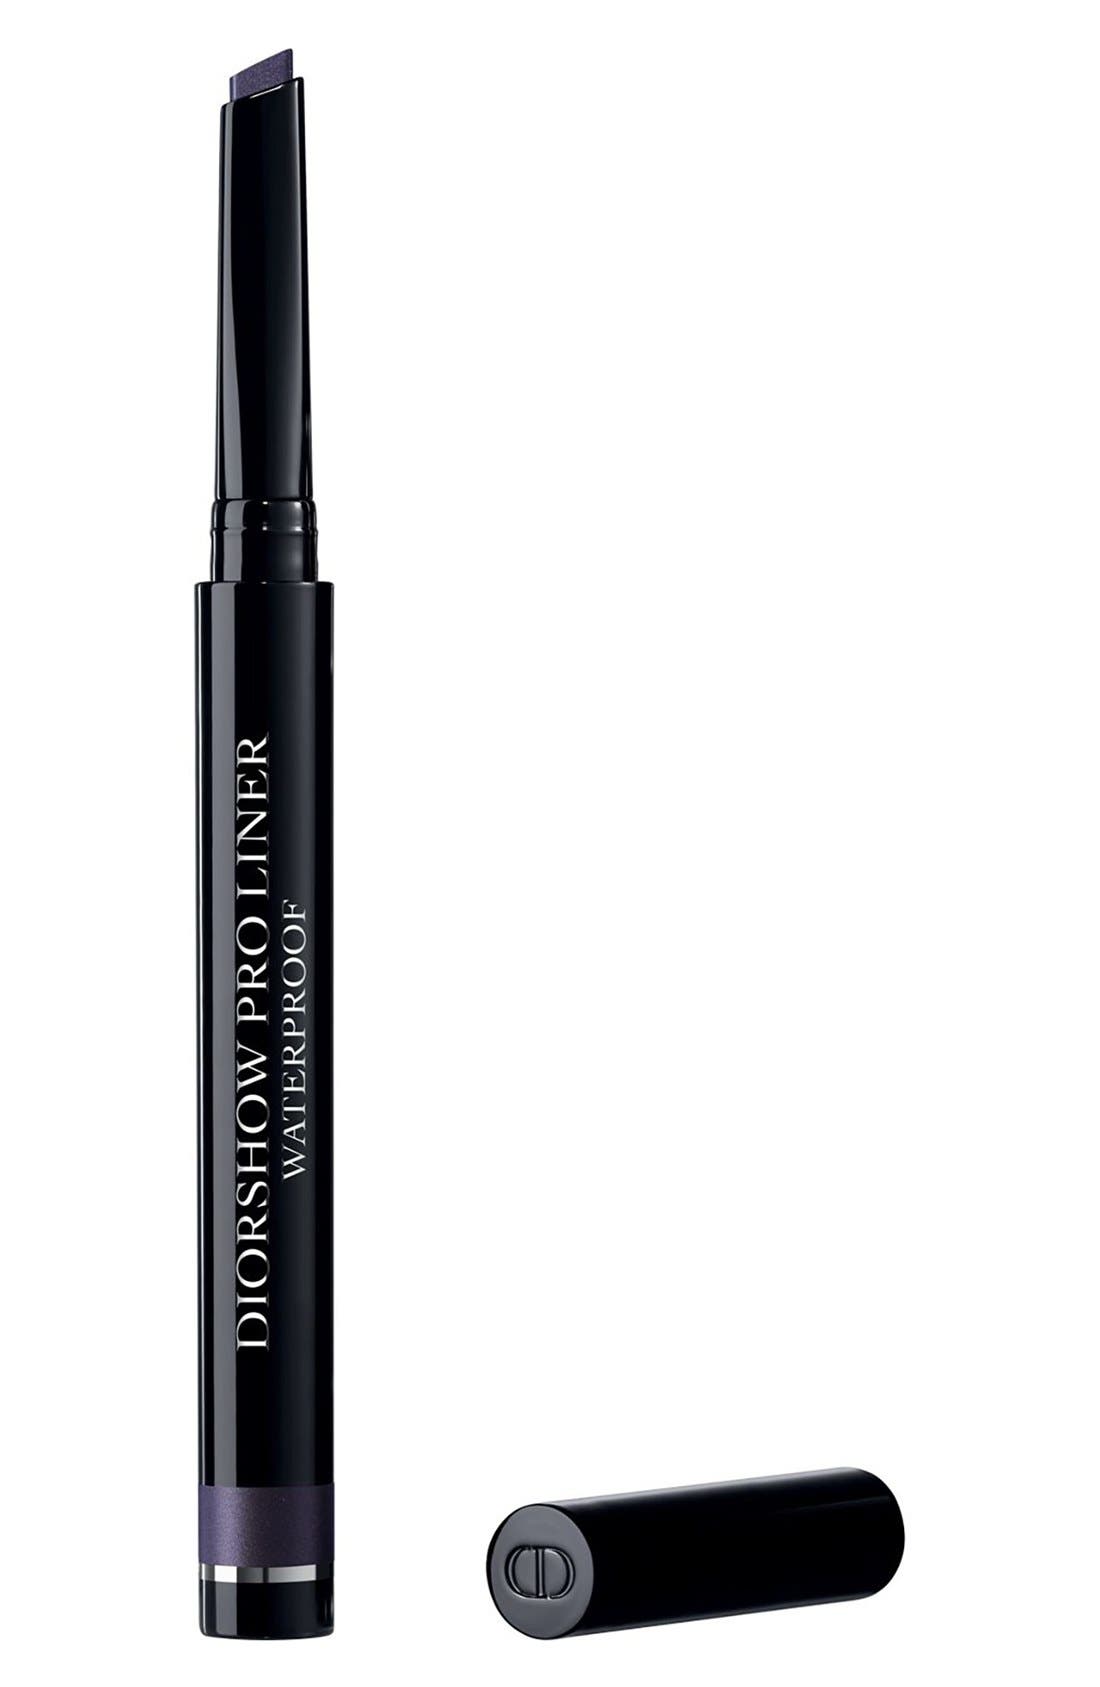 EAN 3348901252812 product image for Women's Dior 'Diorshow' Waterproof Pro Liner - 182 Backstage Purple | upcitemdb.com